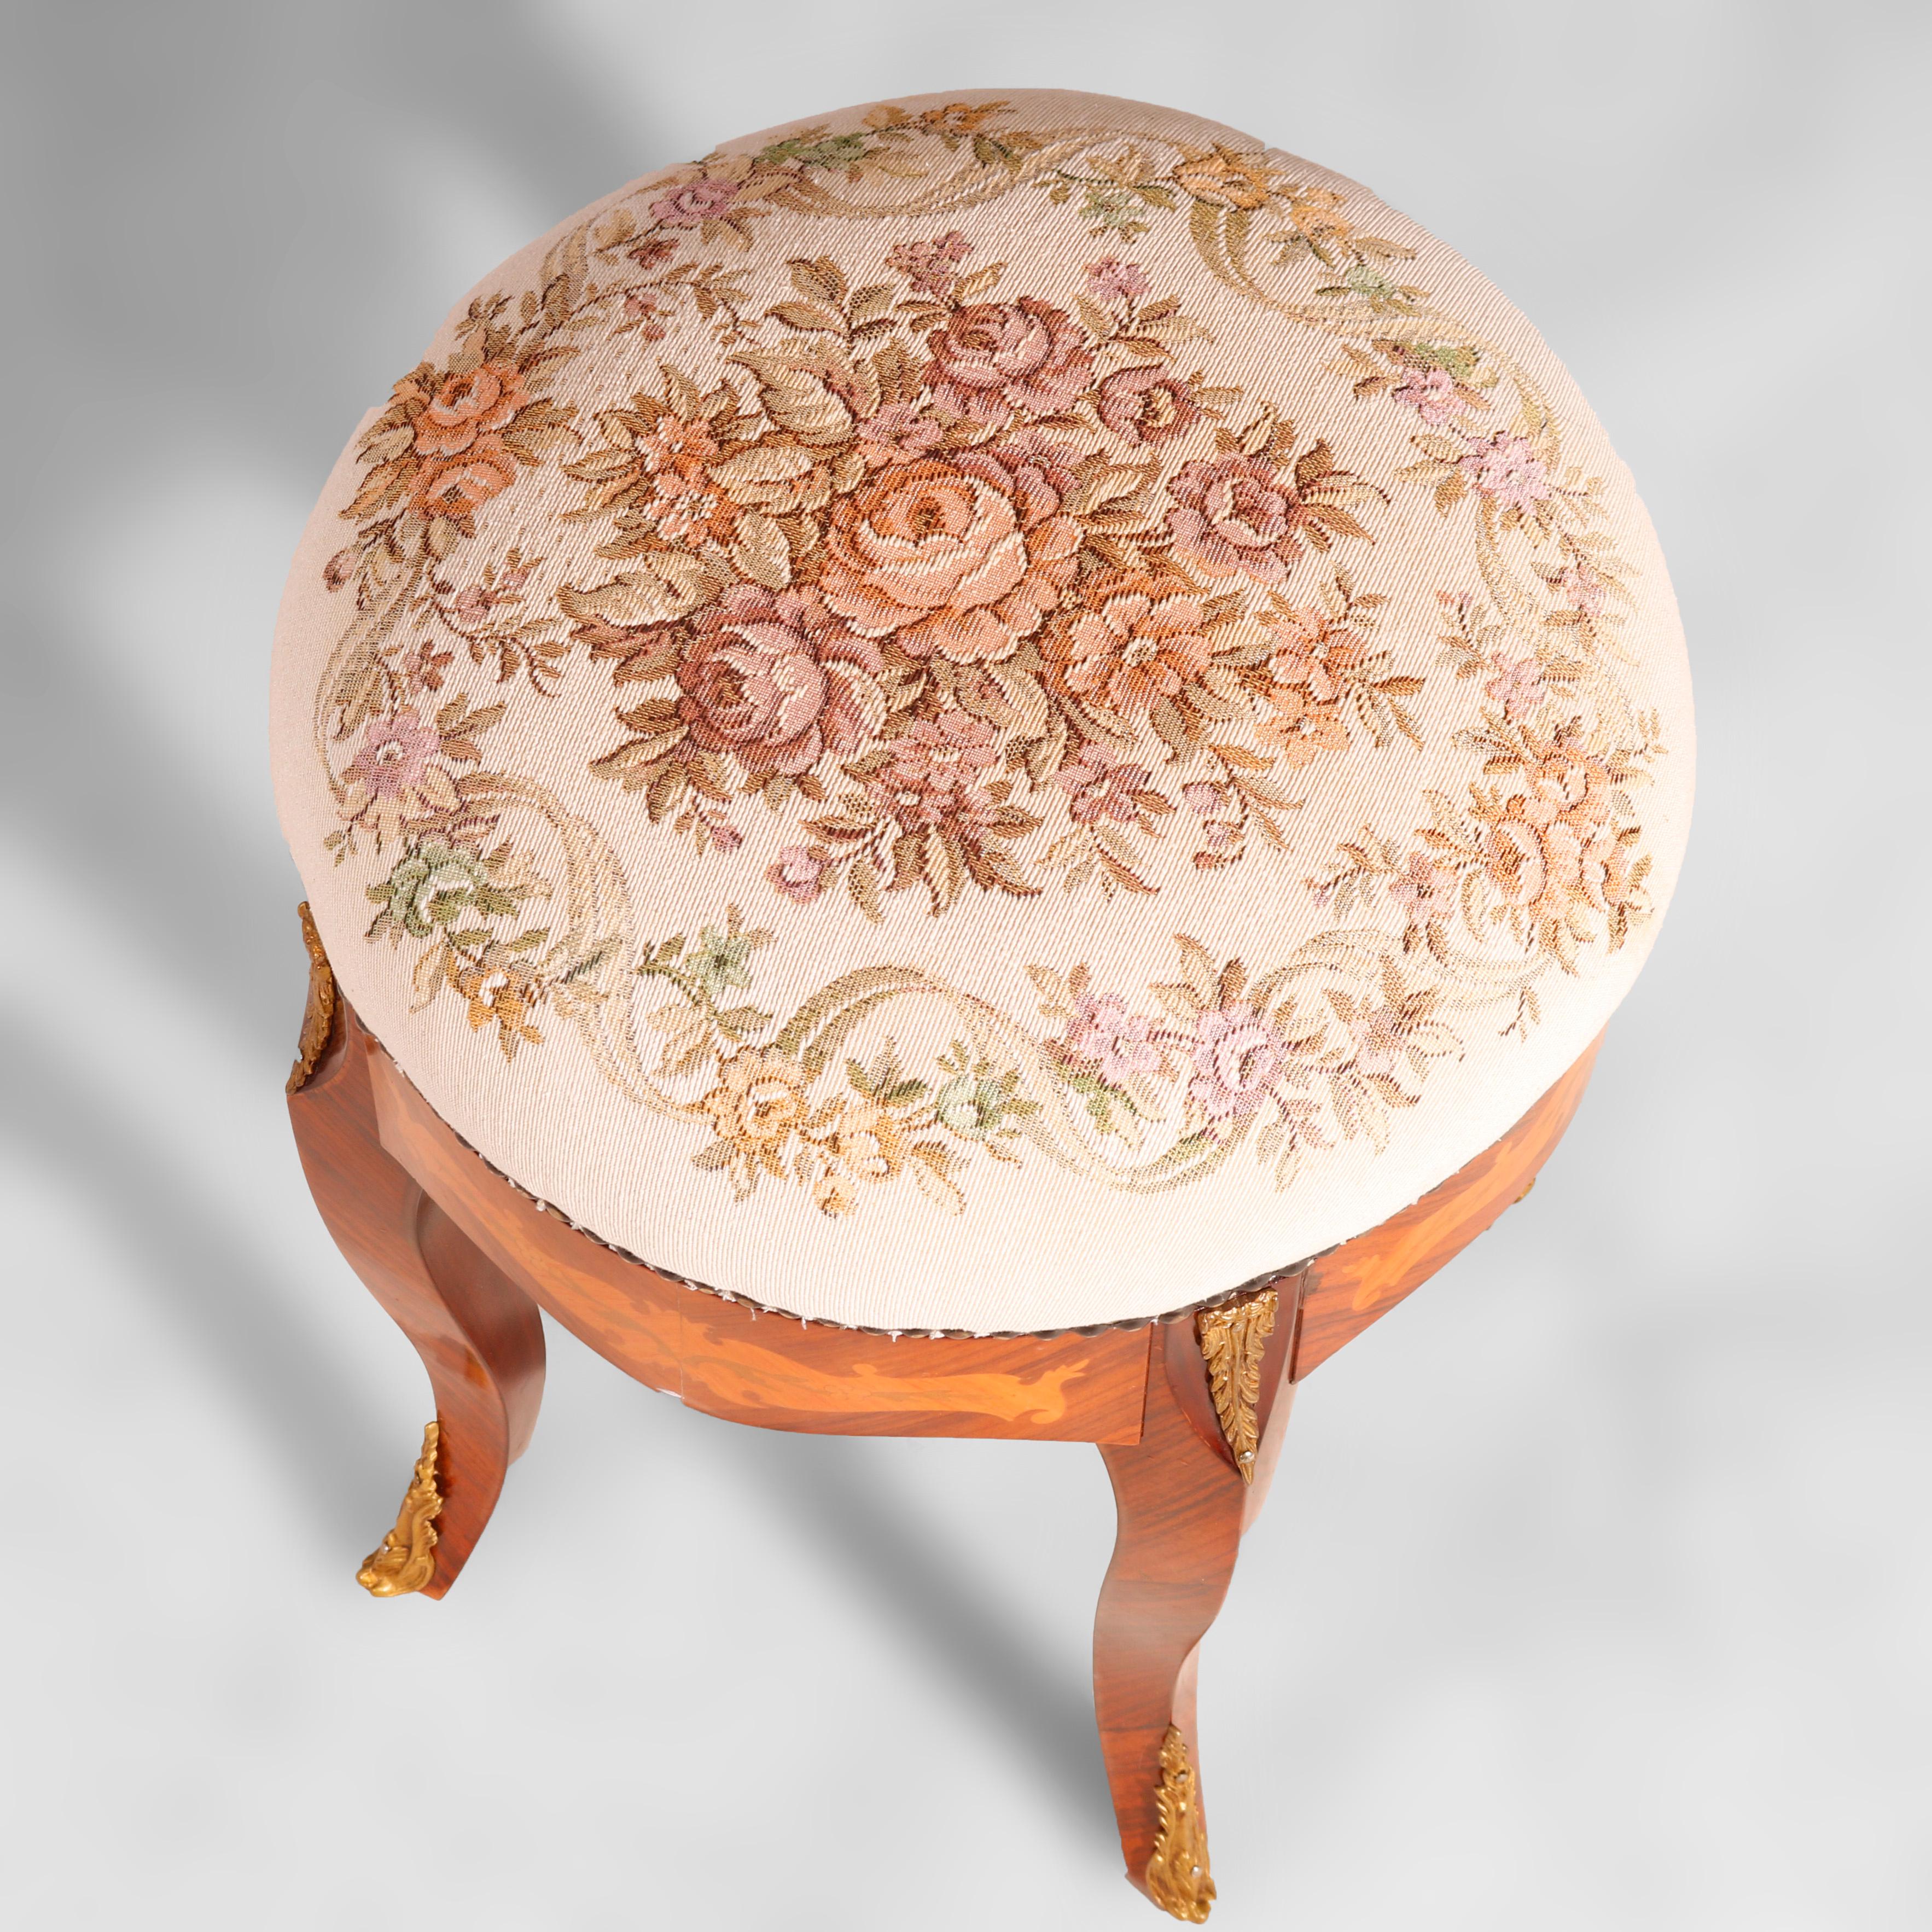 A French Louis XIV stool offers floral needlepoint upholstered seat with kingwood frame having satinwood marquetry and raised on cabriole legs, 20th century

Measures - 19